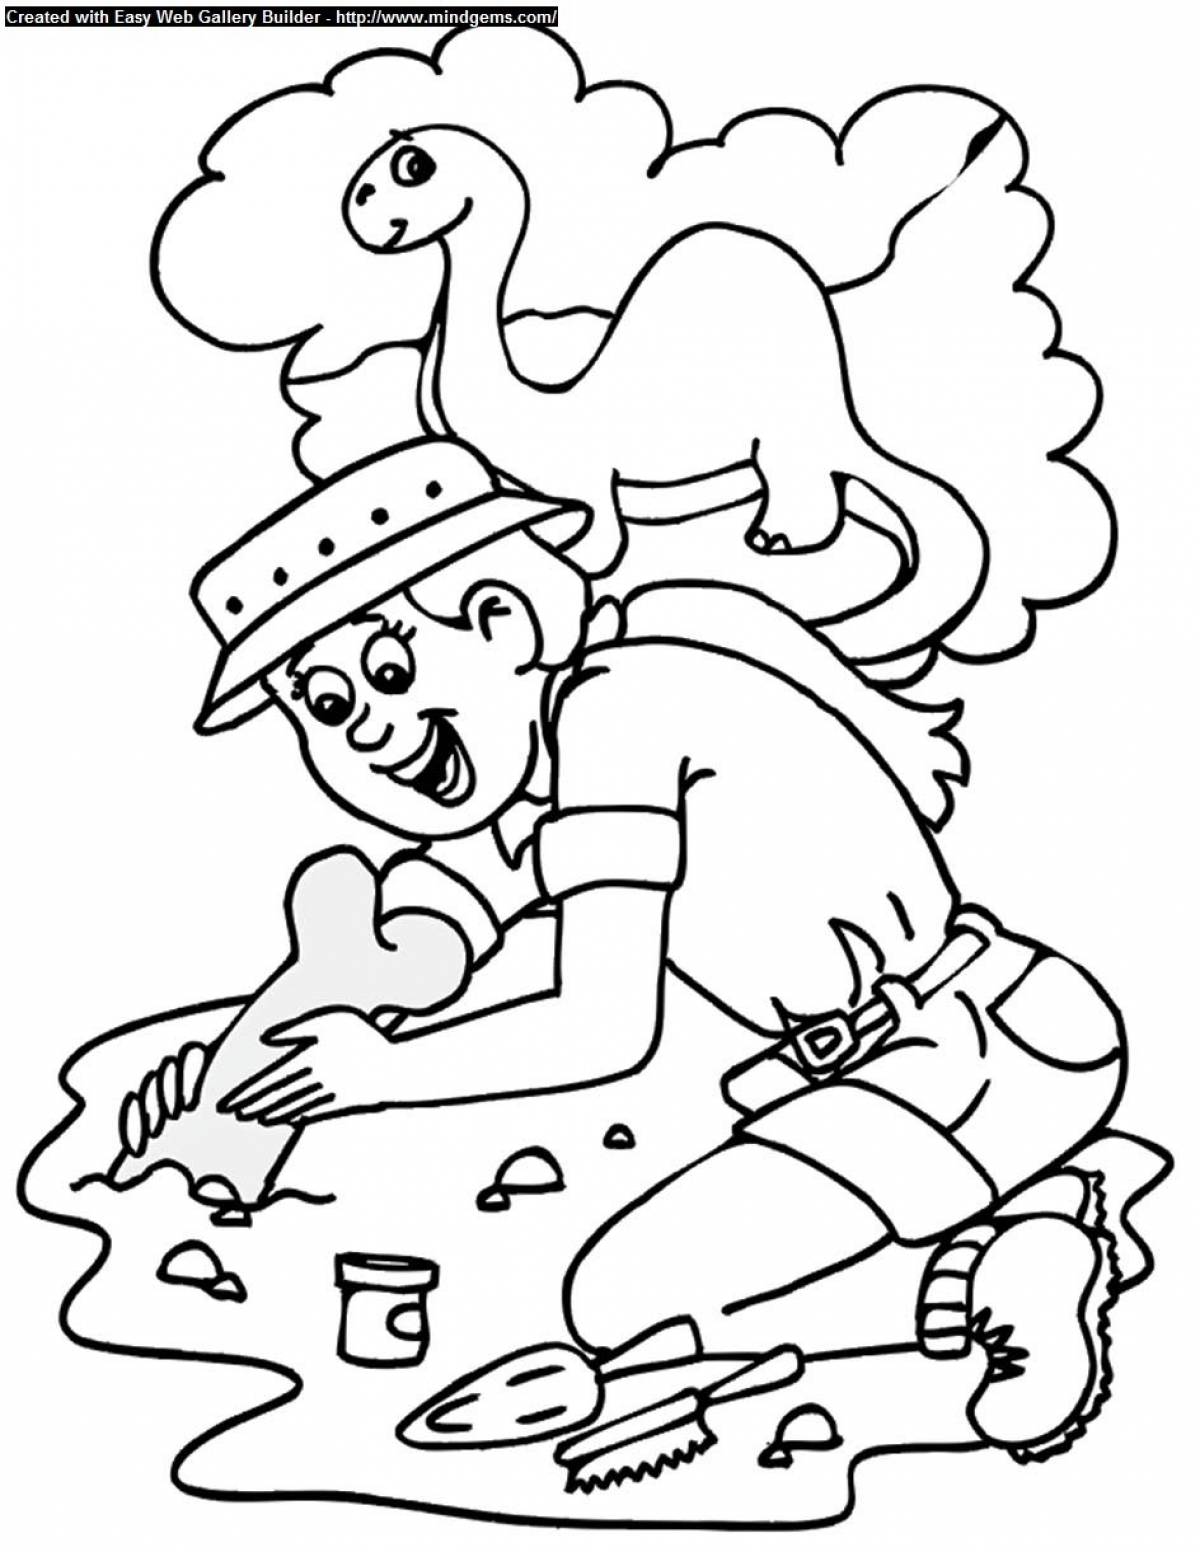 Coloring book marvelous archaeologist